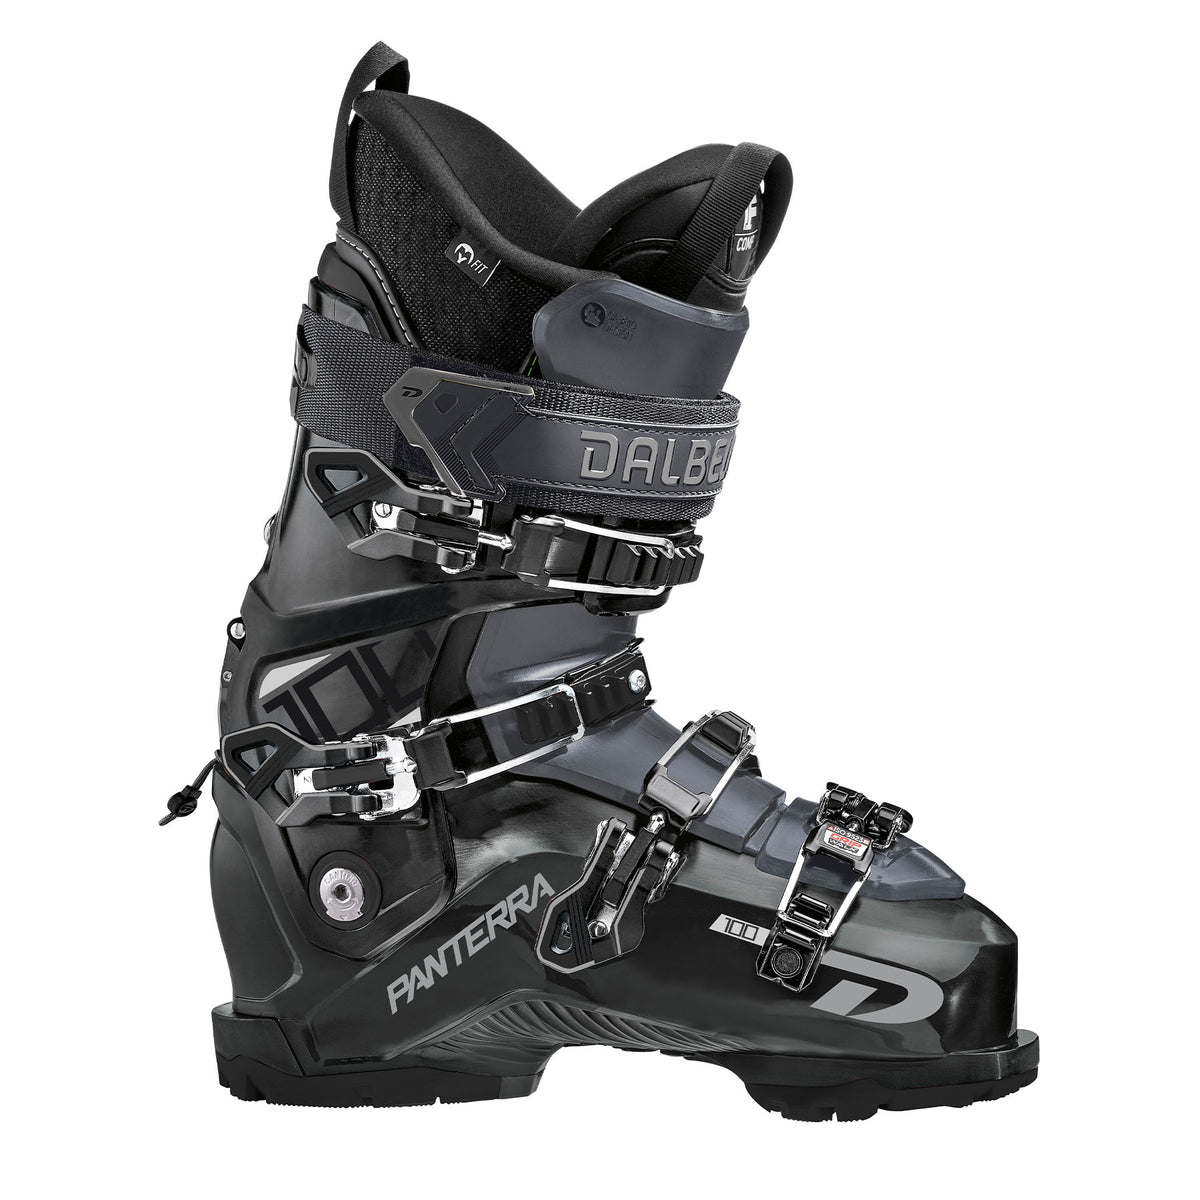 Hero image featuring a side angle shot of the Dalbello Panterra 100 ski boot in black with silver and grey trim.